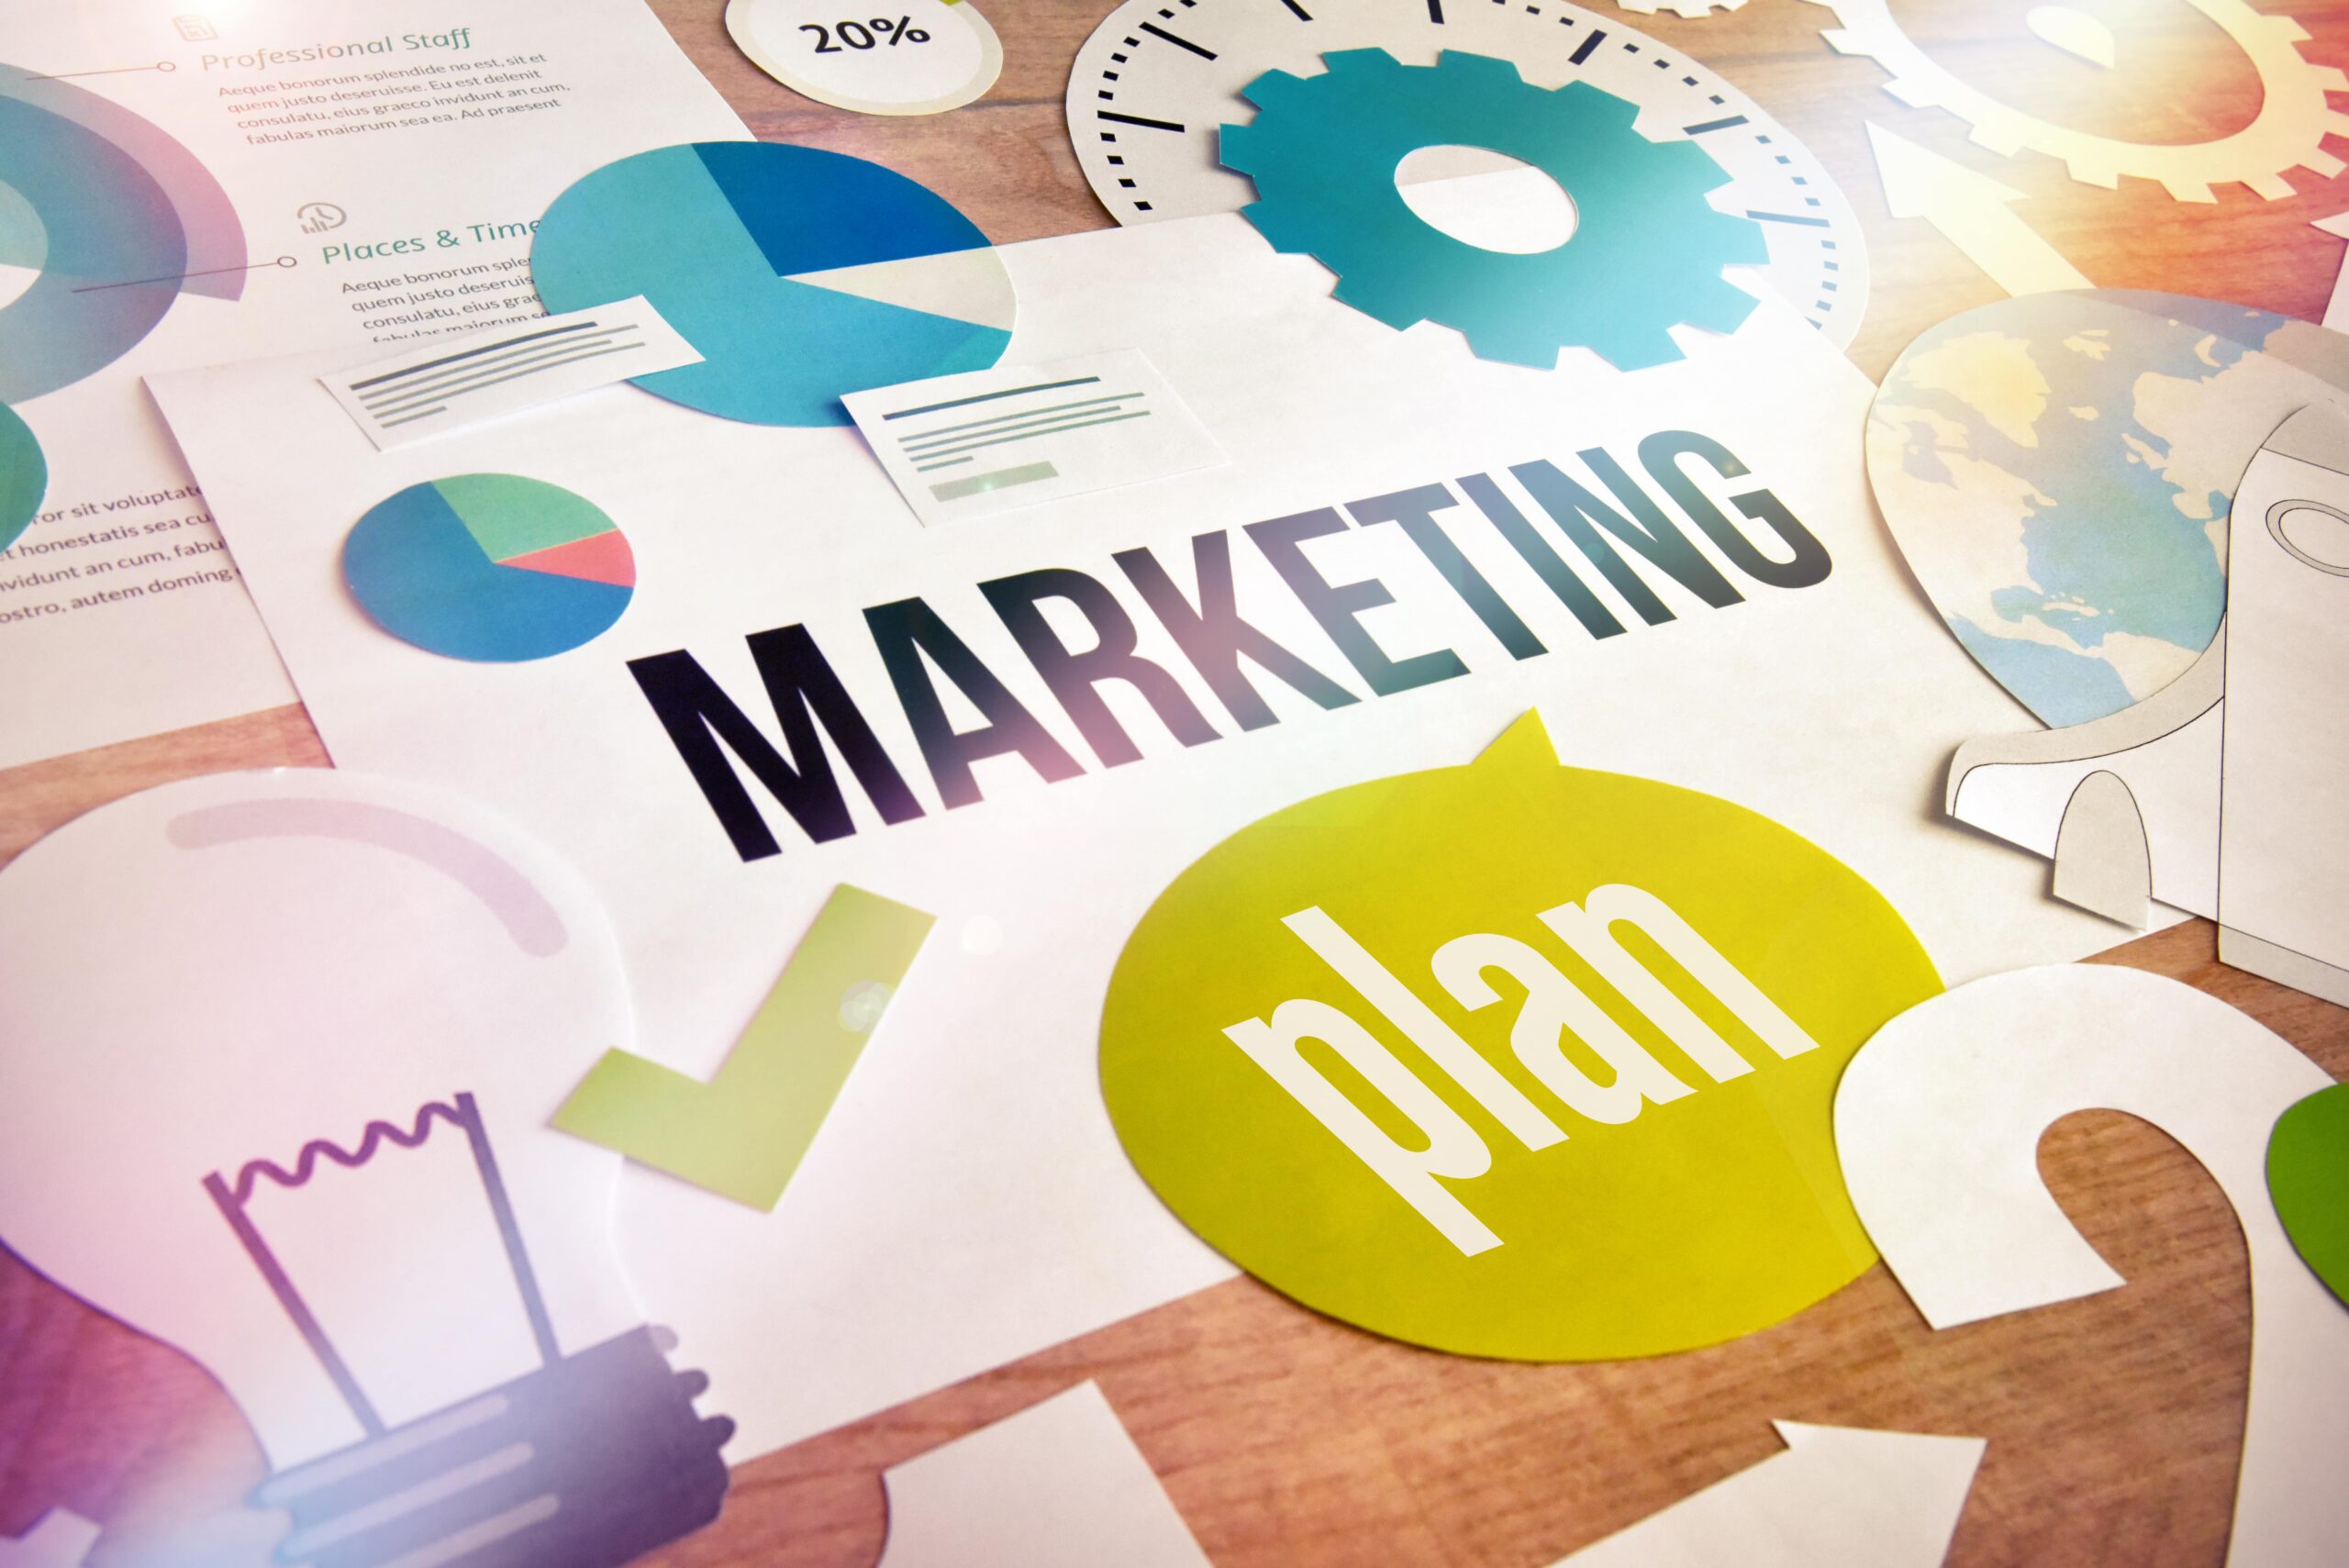 How To Measure The Success Of Your Banner Marketing Campaign